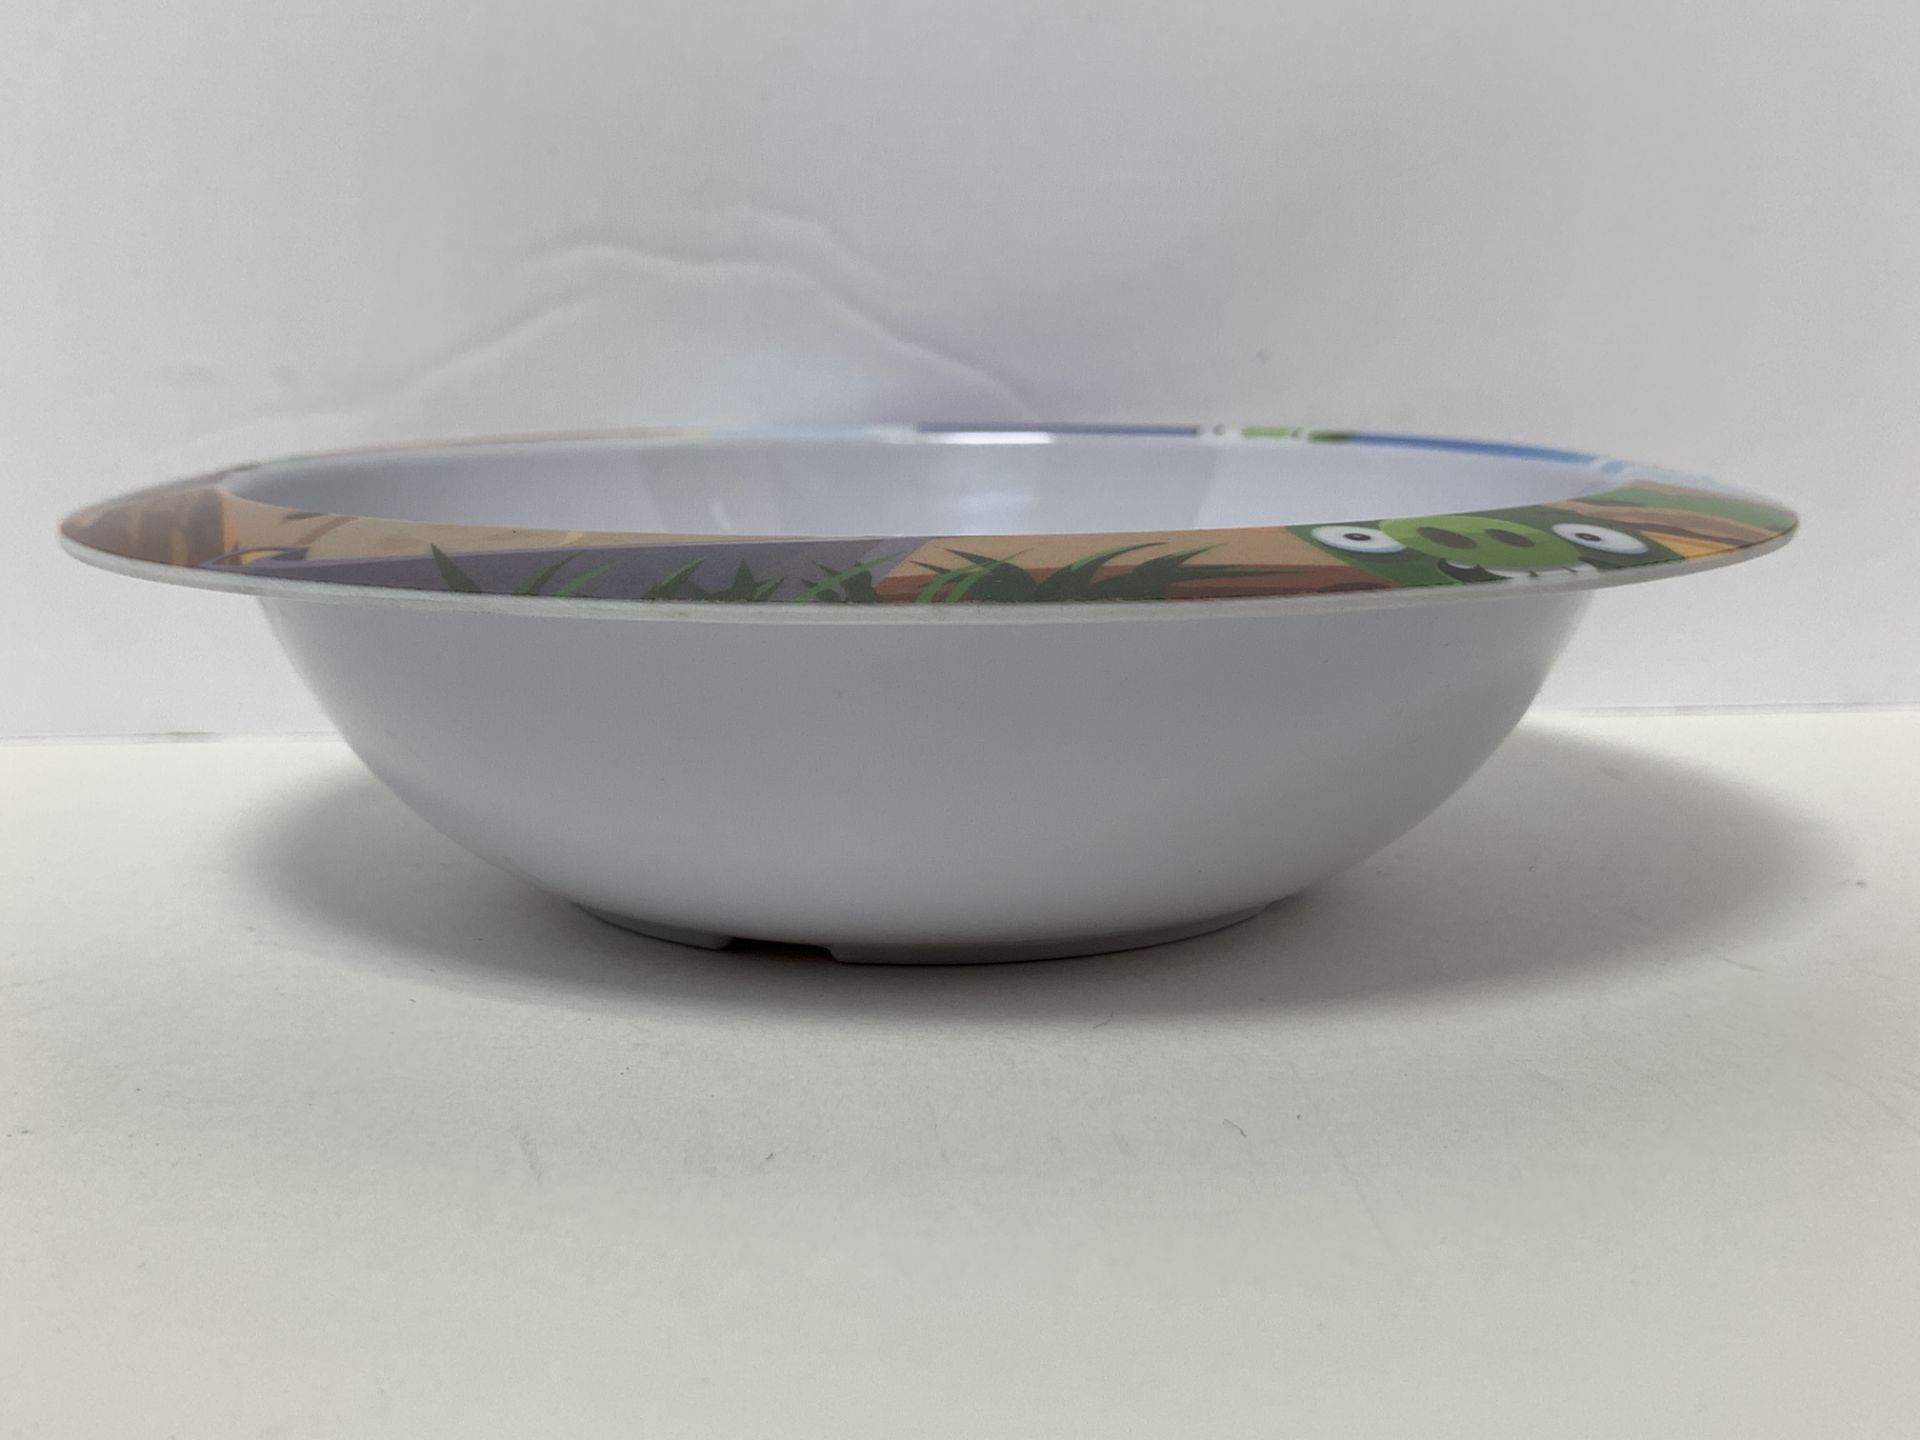 240 x Angry Birds Branded Melamine Bowls - Image 4 of 6